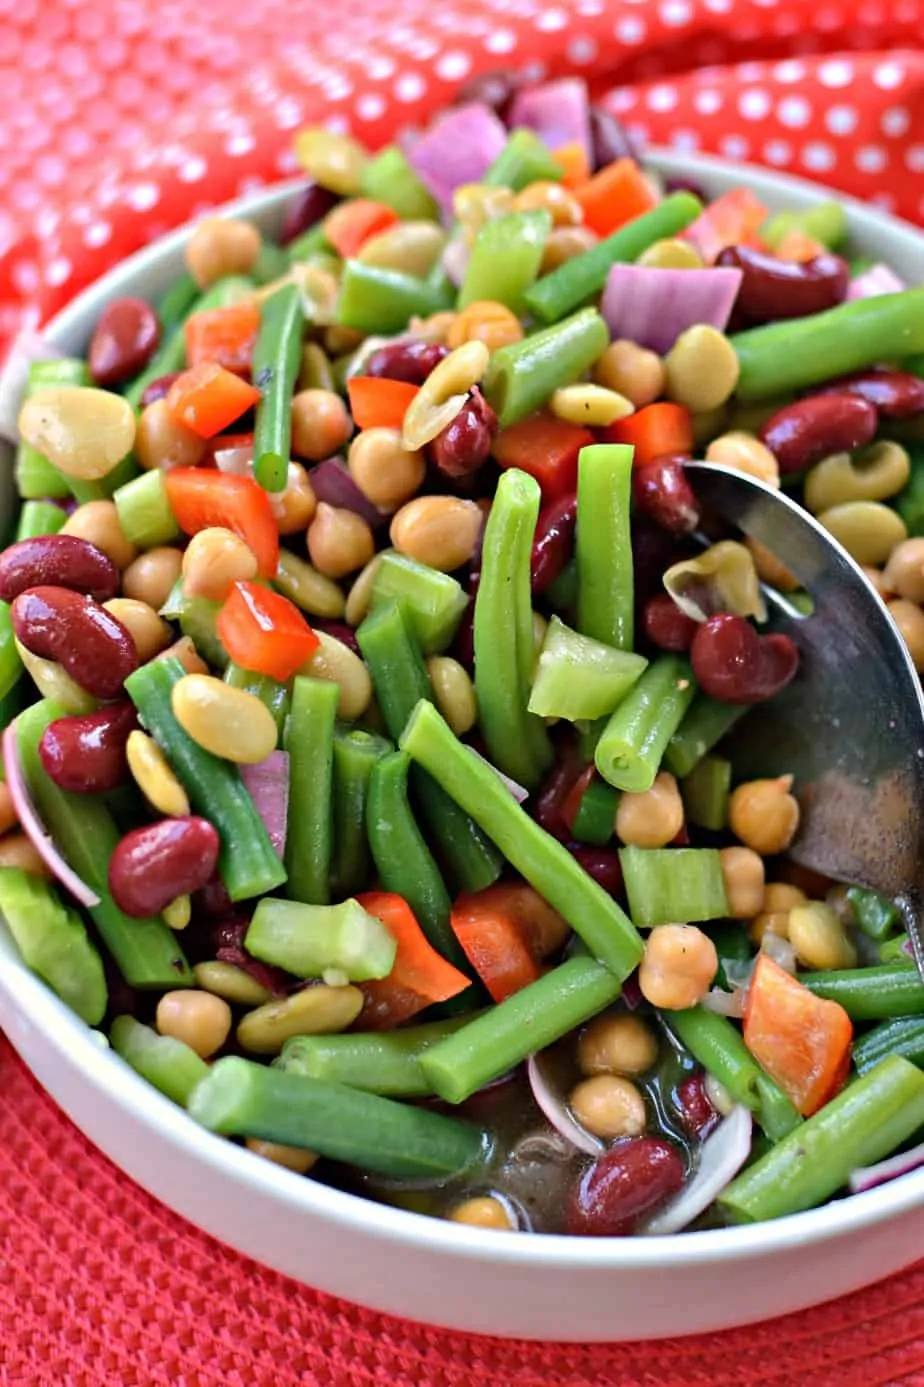 This Bean Salad is quick to come together, nutritious and oh so darn delicious!